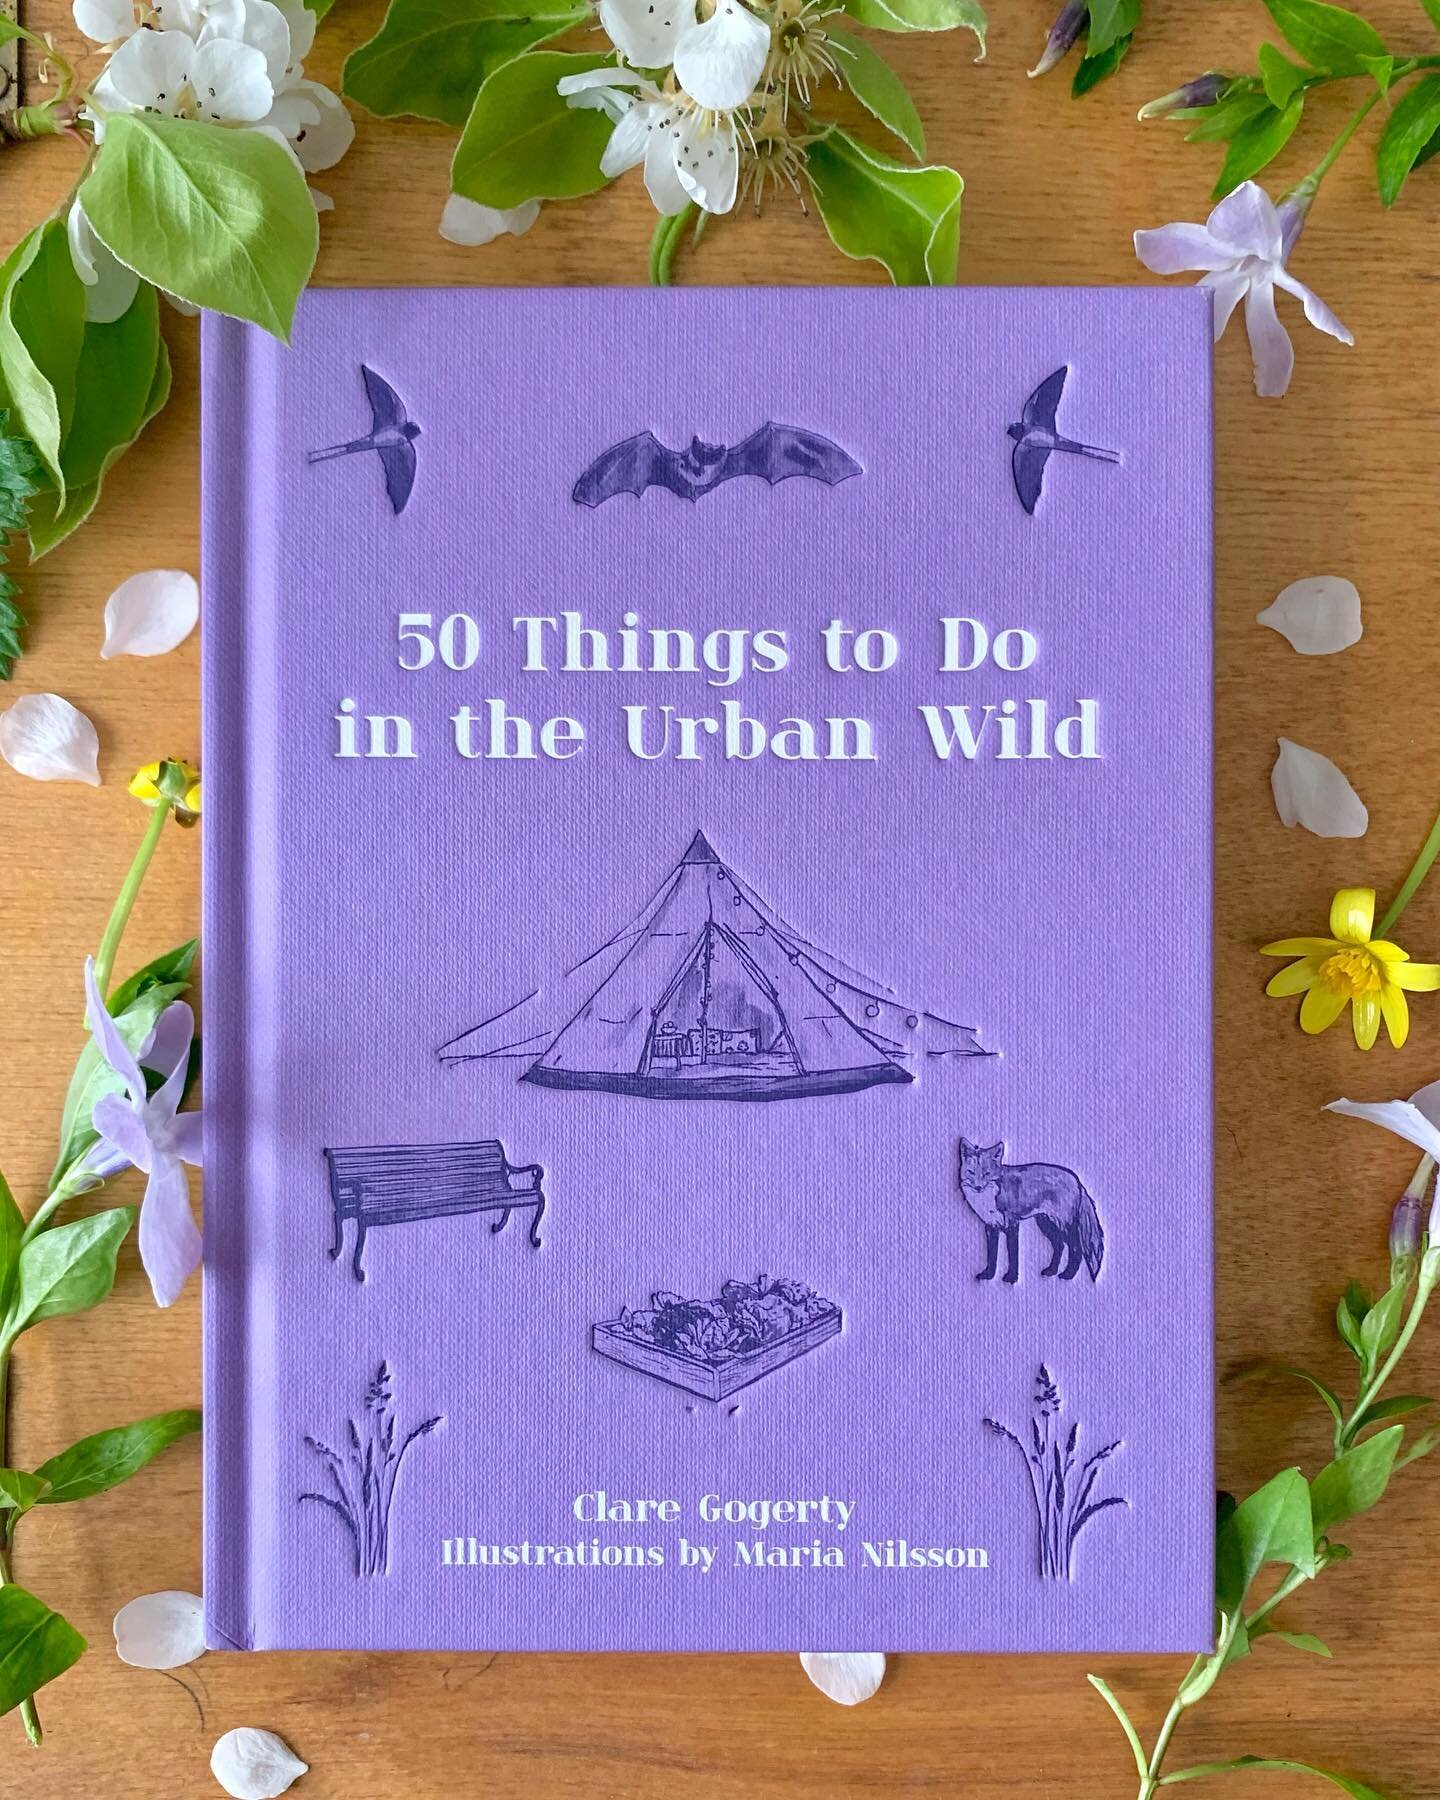 Out today! Happy Publication Day for &lsquo;50 Things to do in the Urban Wild&rsquo; Such a lovely book to illustrate, filled with with tips on how to connect with nature in the city. Includes: 

Be an Urban Naturalist: Go on a night safari, apprecia